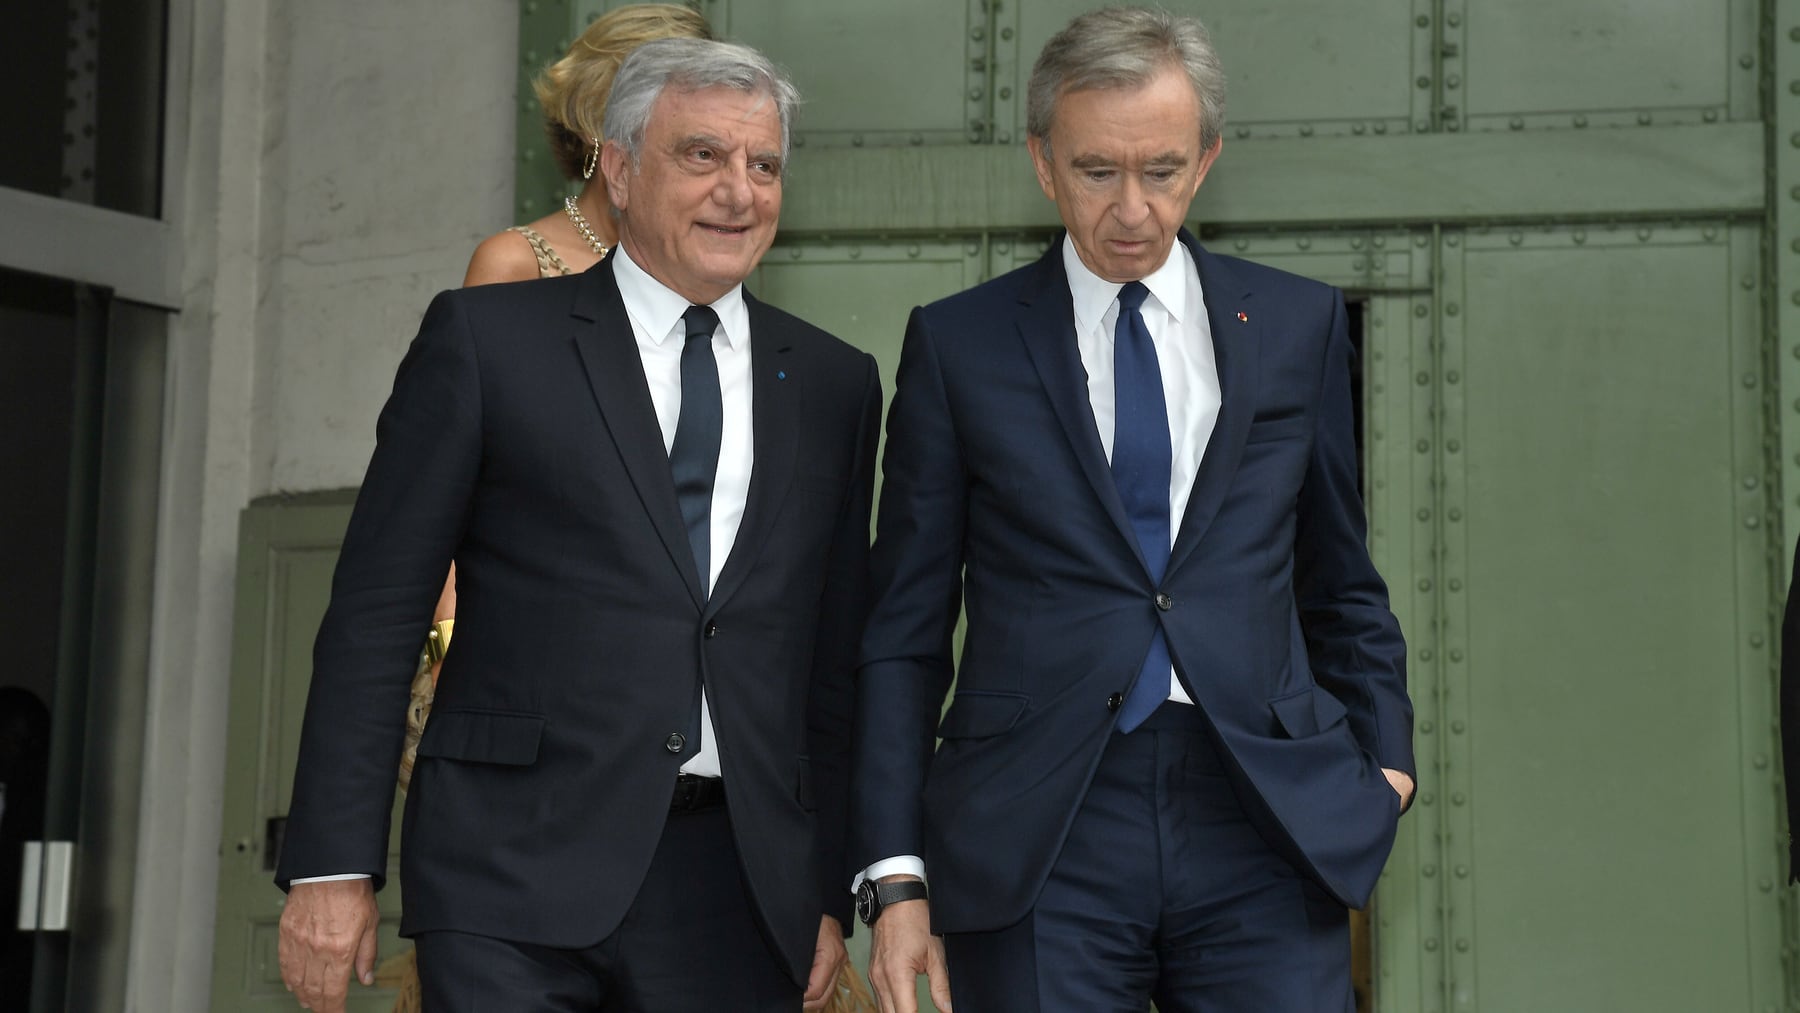 Sidney Toledano and Bernard Arnault arrive at an hommage ceremony for Karl Lagerfeld Homage at the Grand Palais in June 2019. Getty Images.